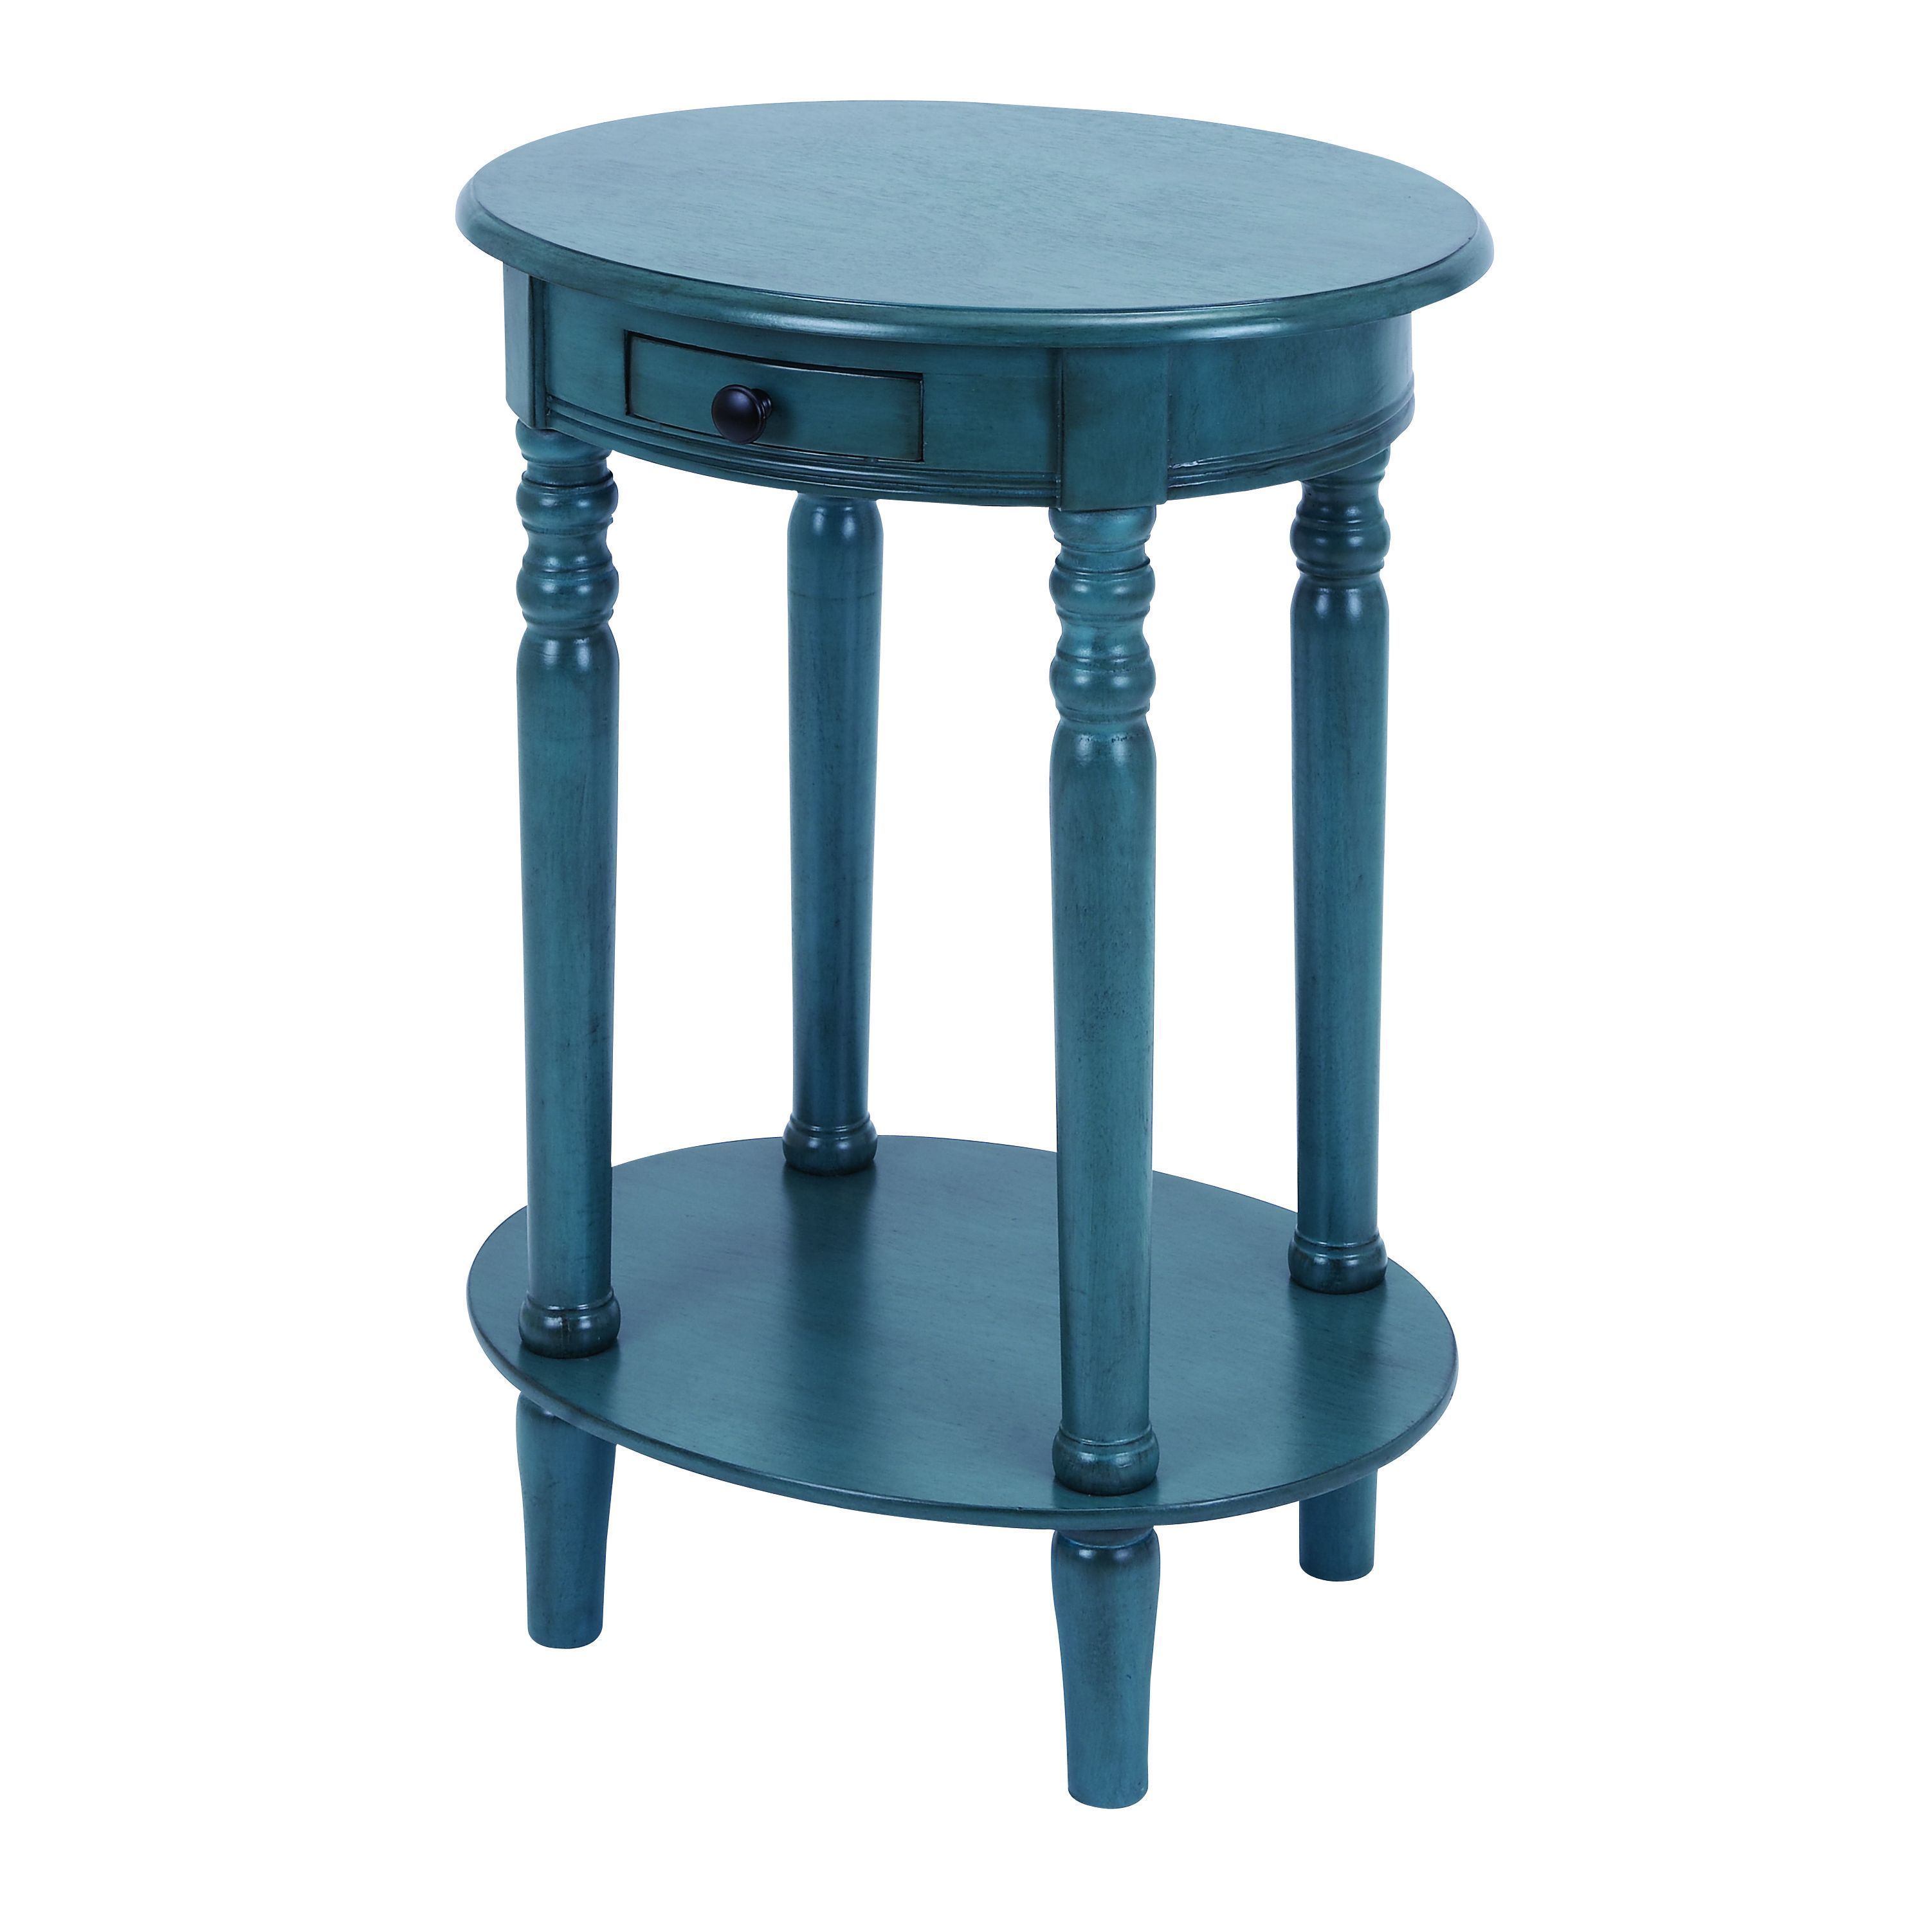 this vintage style accent table fit for lavish countryside home metal the handcrafted wood bright and polished blue beautiful aqua marine small white gloss console coffee with